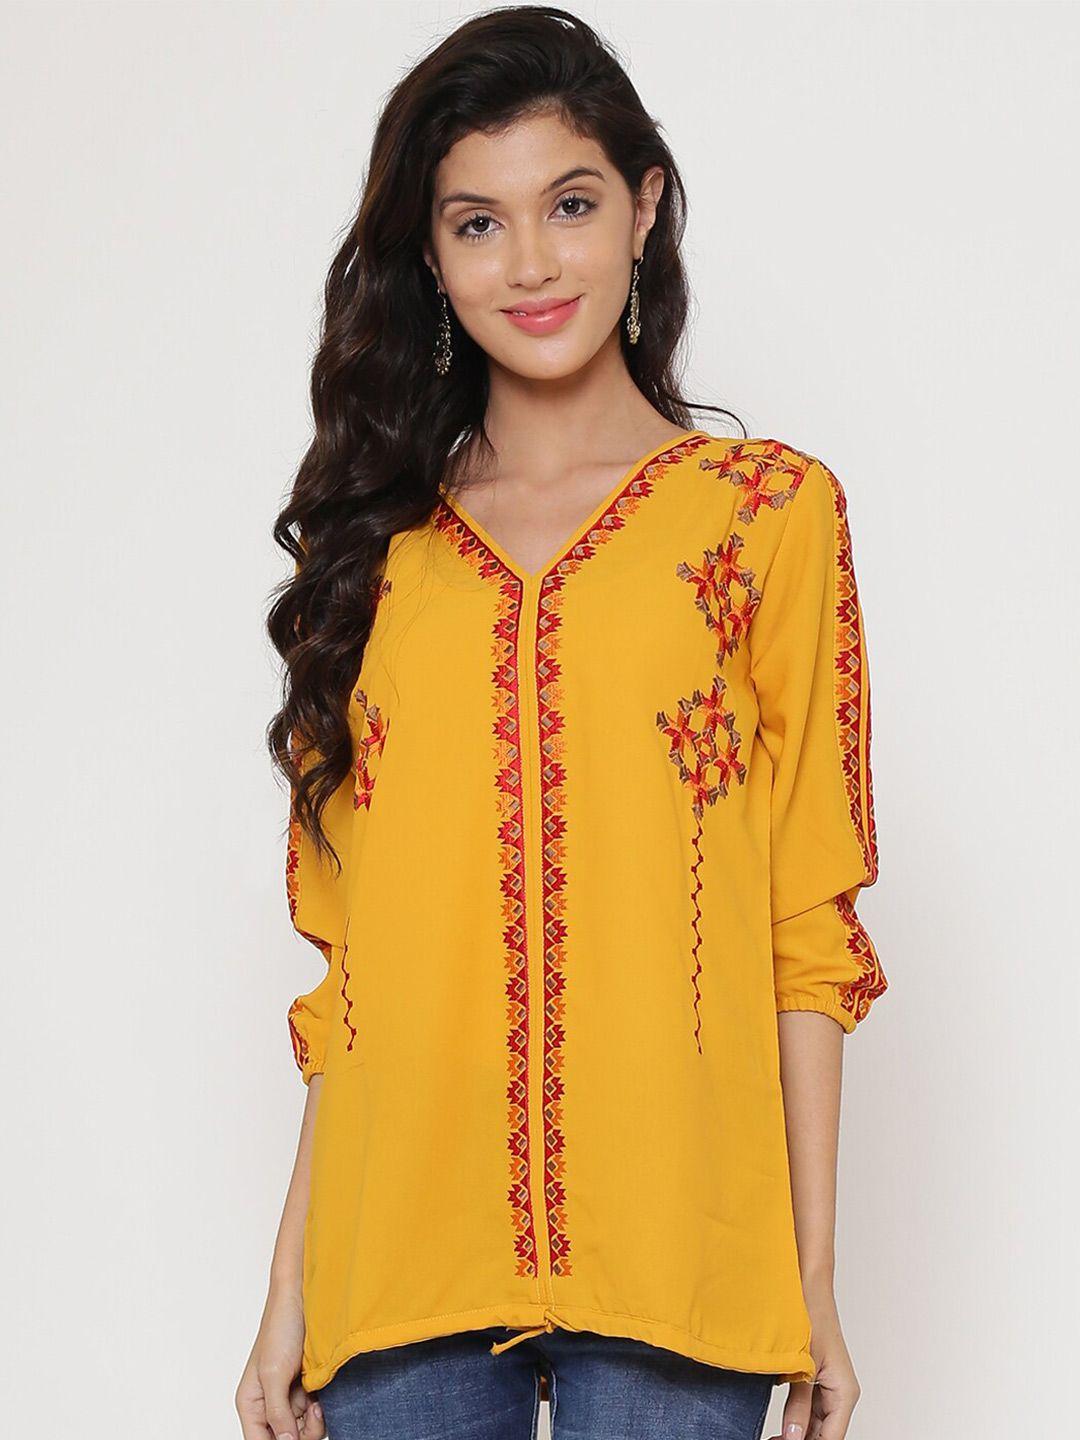 be-indi-women-mustard-yellow-&-red-embroidered-top